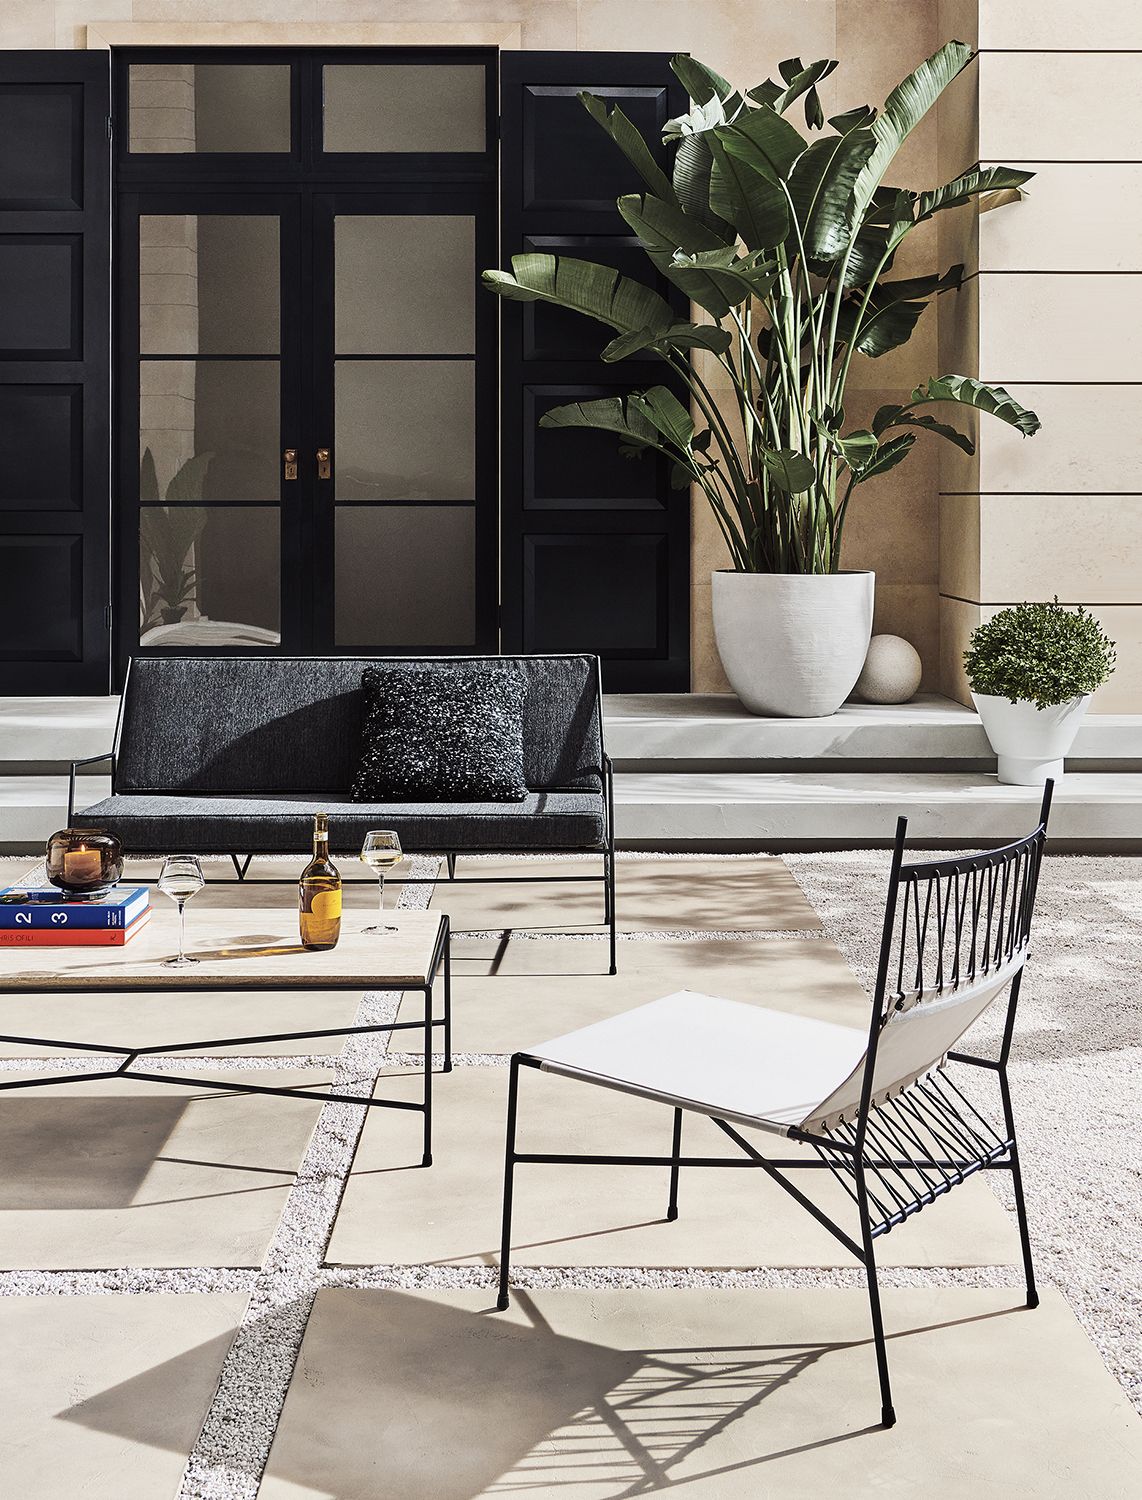 CB2 furniture brings iconic mid-century pieces into to the modern age ...